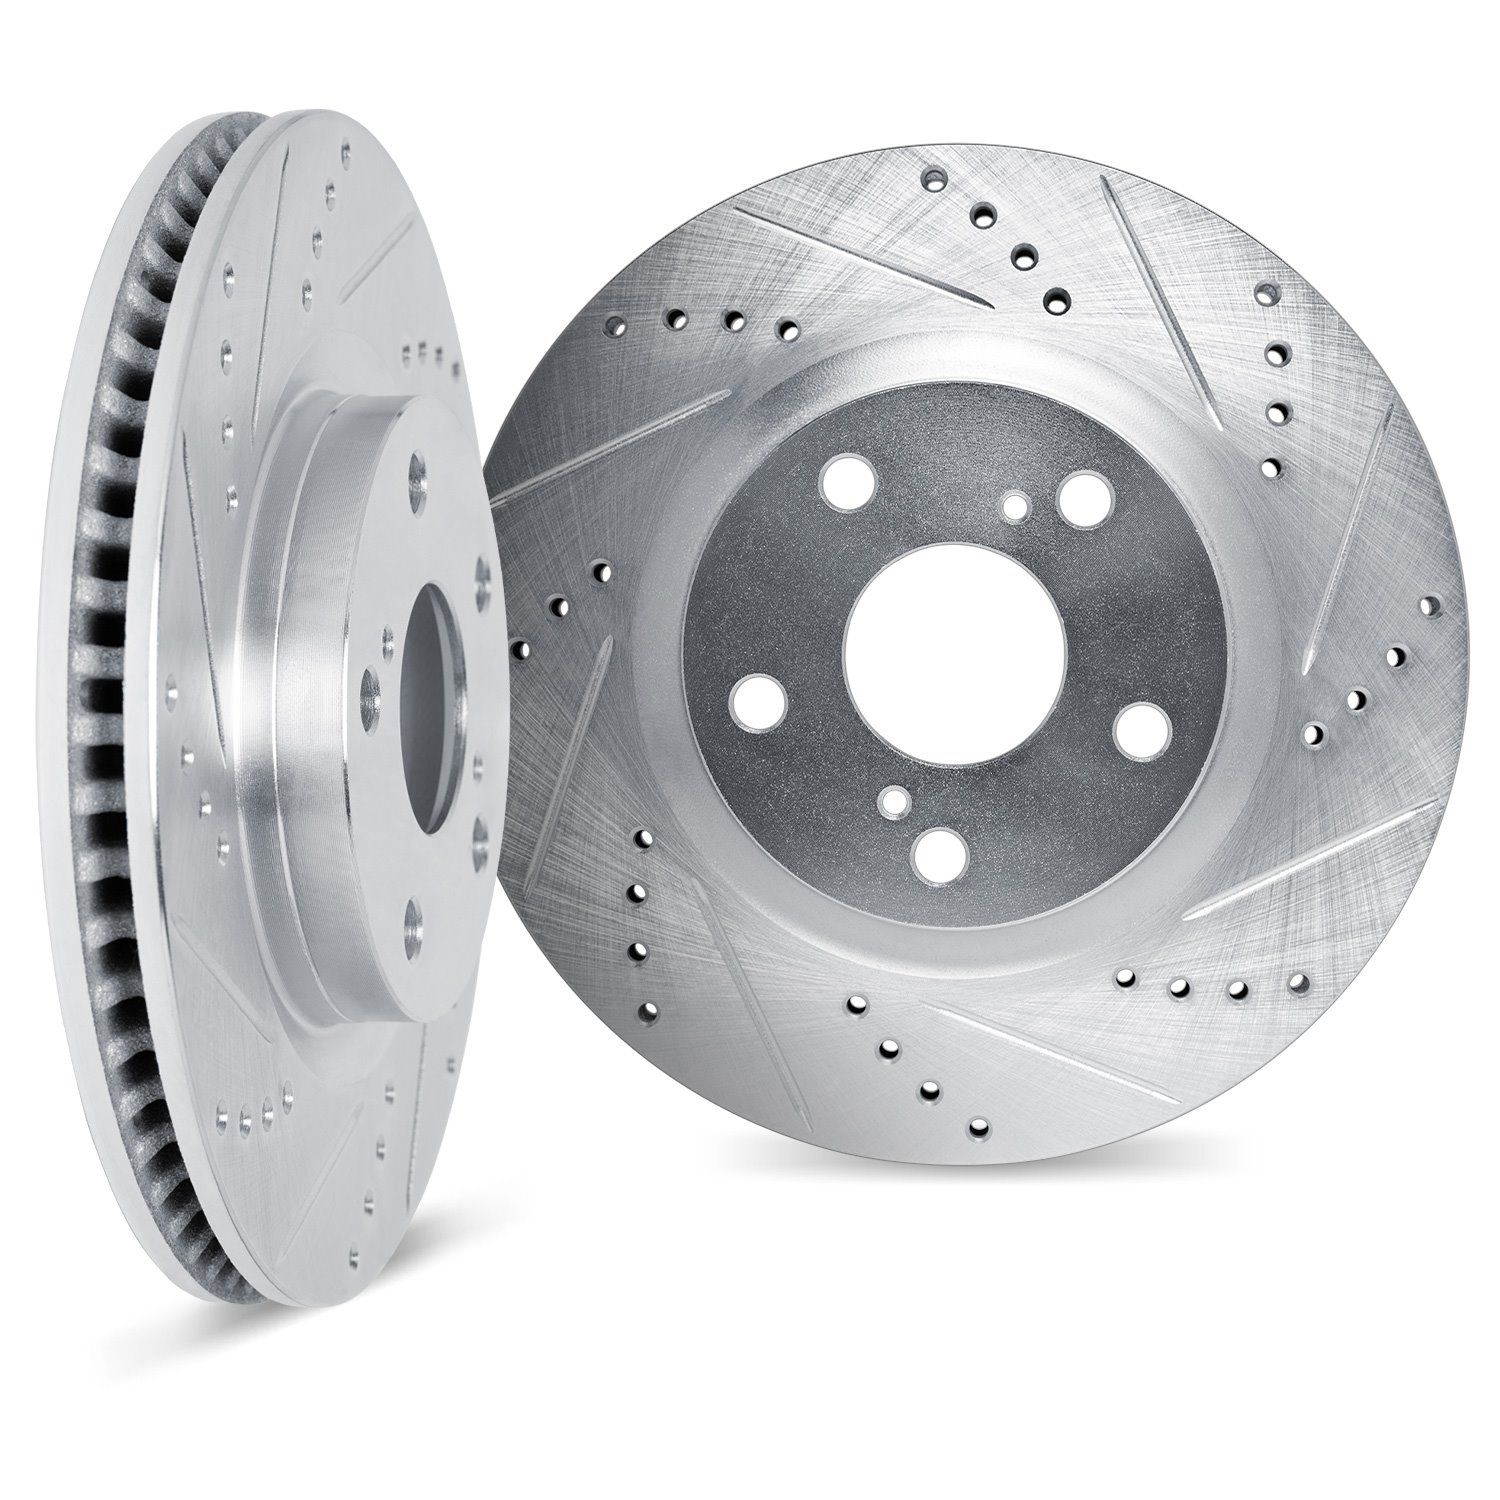 7002-42032 Drilled/Slotted Brake Rotors [Silver], Fits Select Mopar, Position: Rear